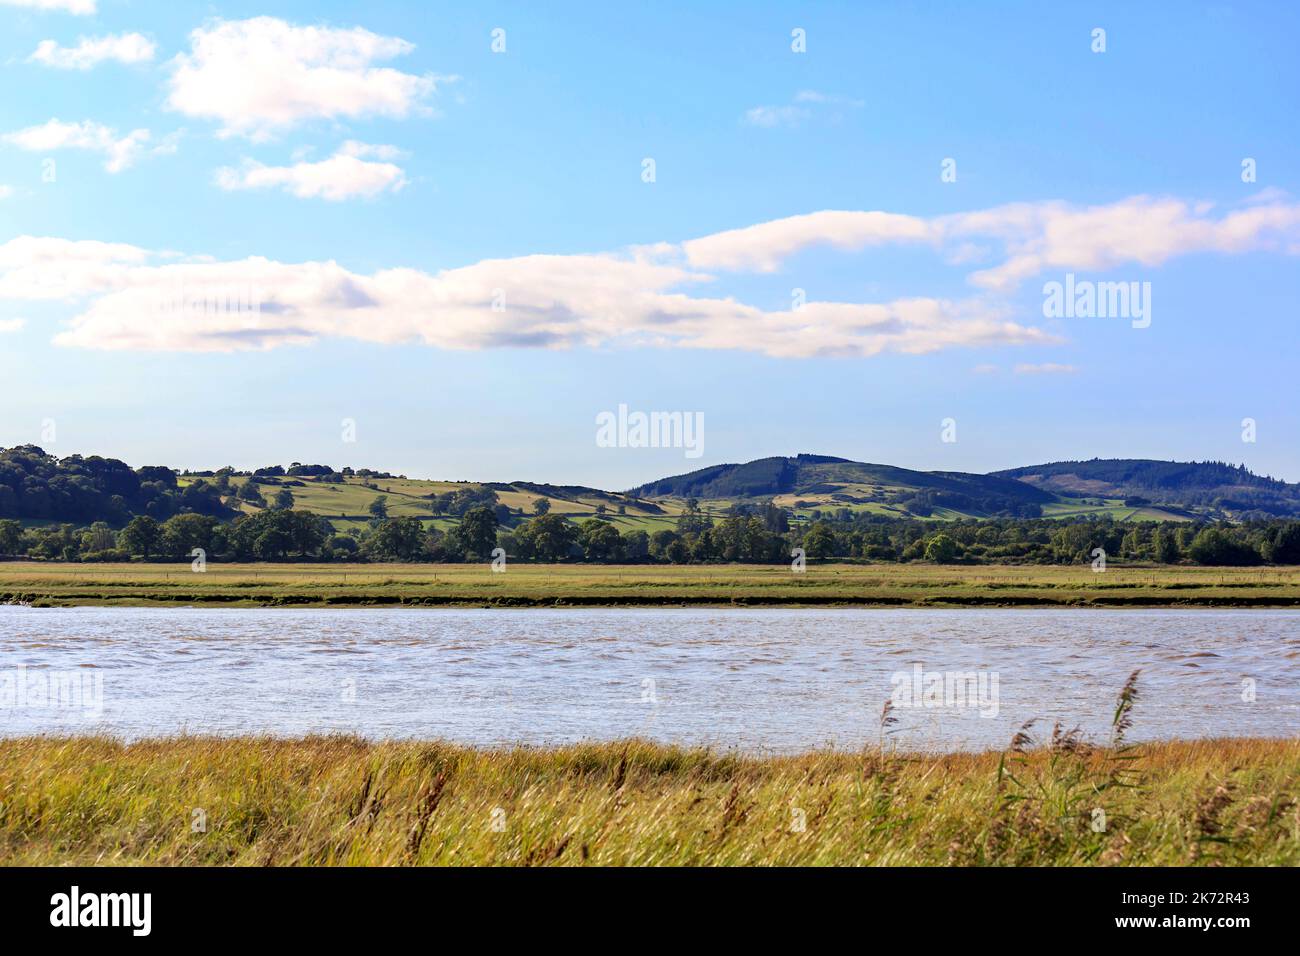 View over the River Nith towards farmland, trees and the hillsides of Dumfries and Galloway Scotland Stock Photo